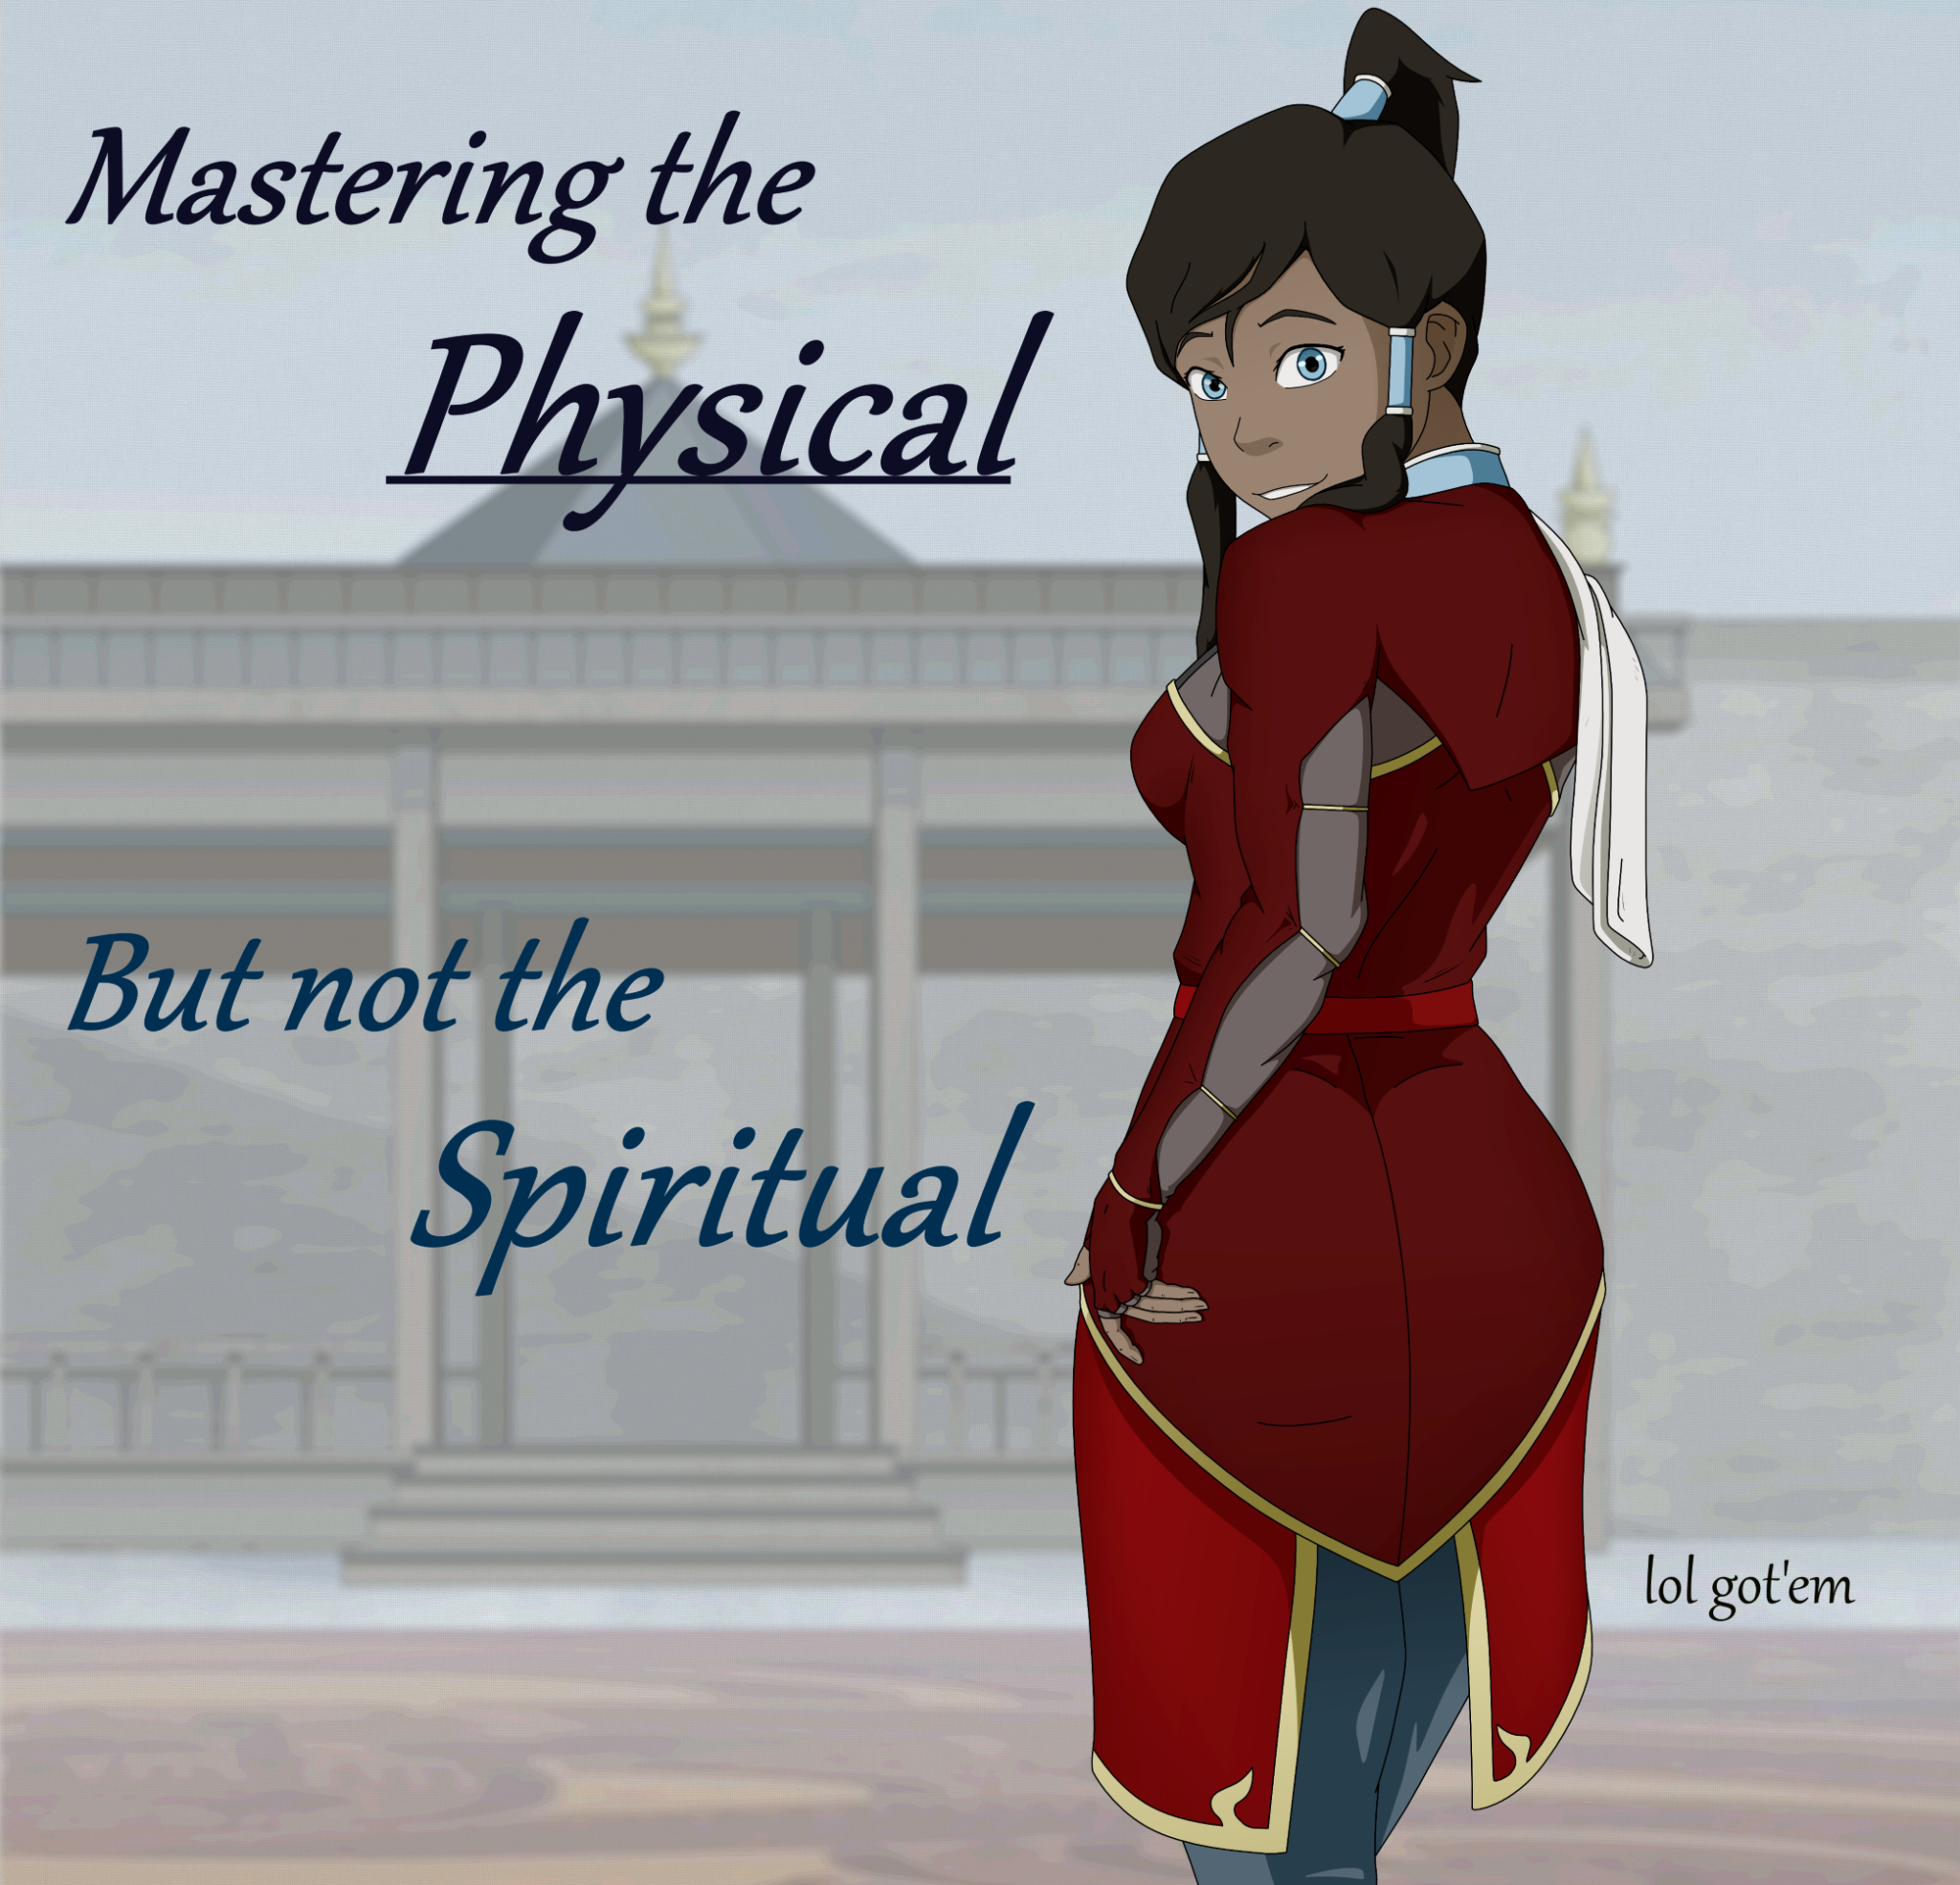 Mastering the Physical